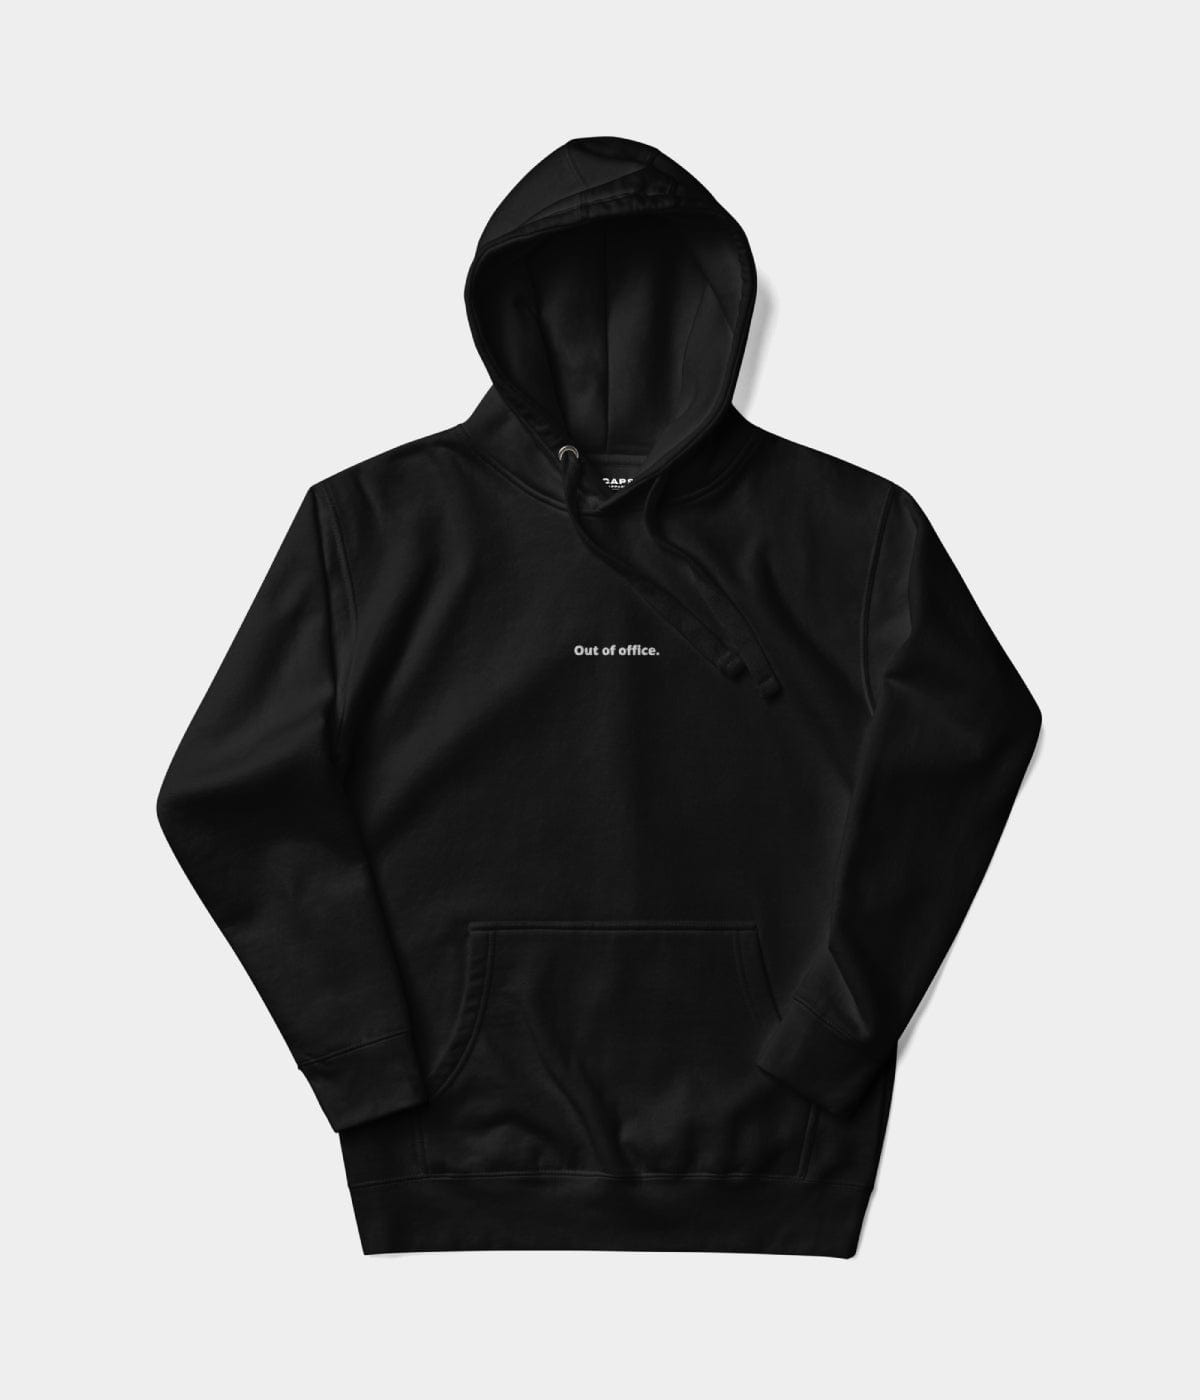 OUT OF OFFICE HOODIE.